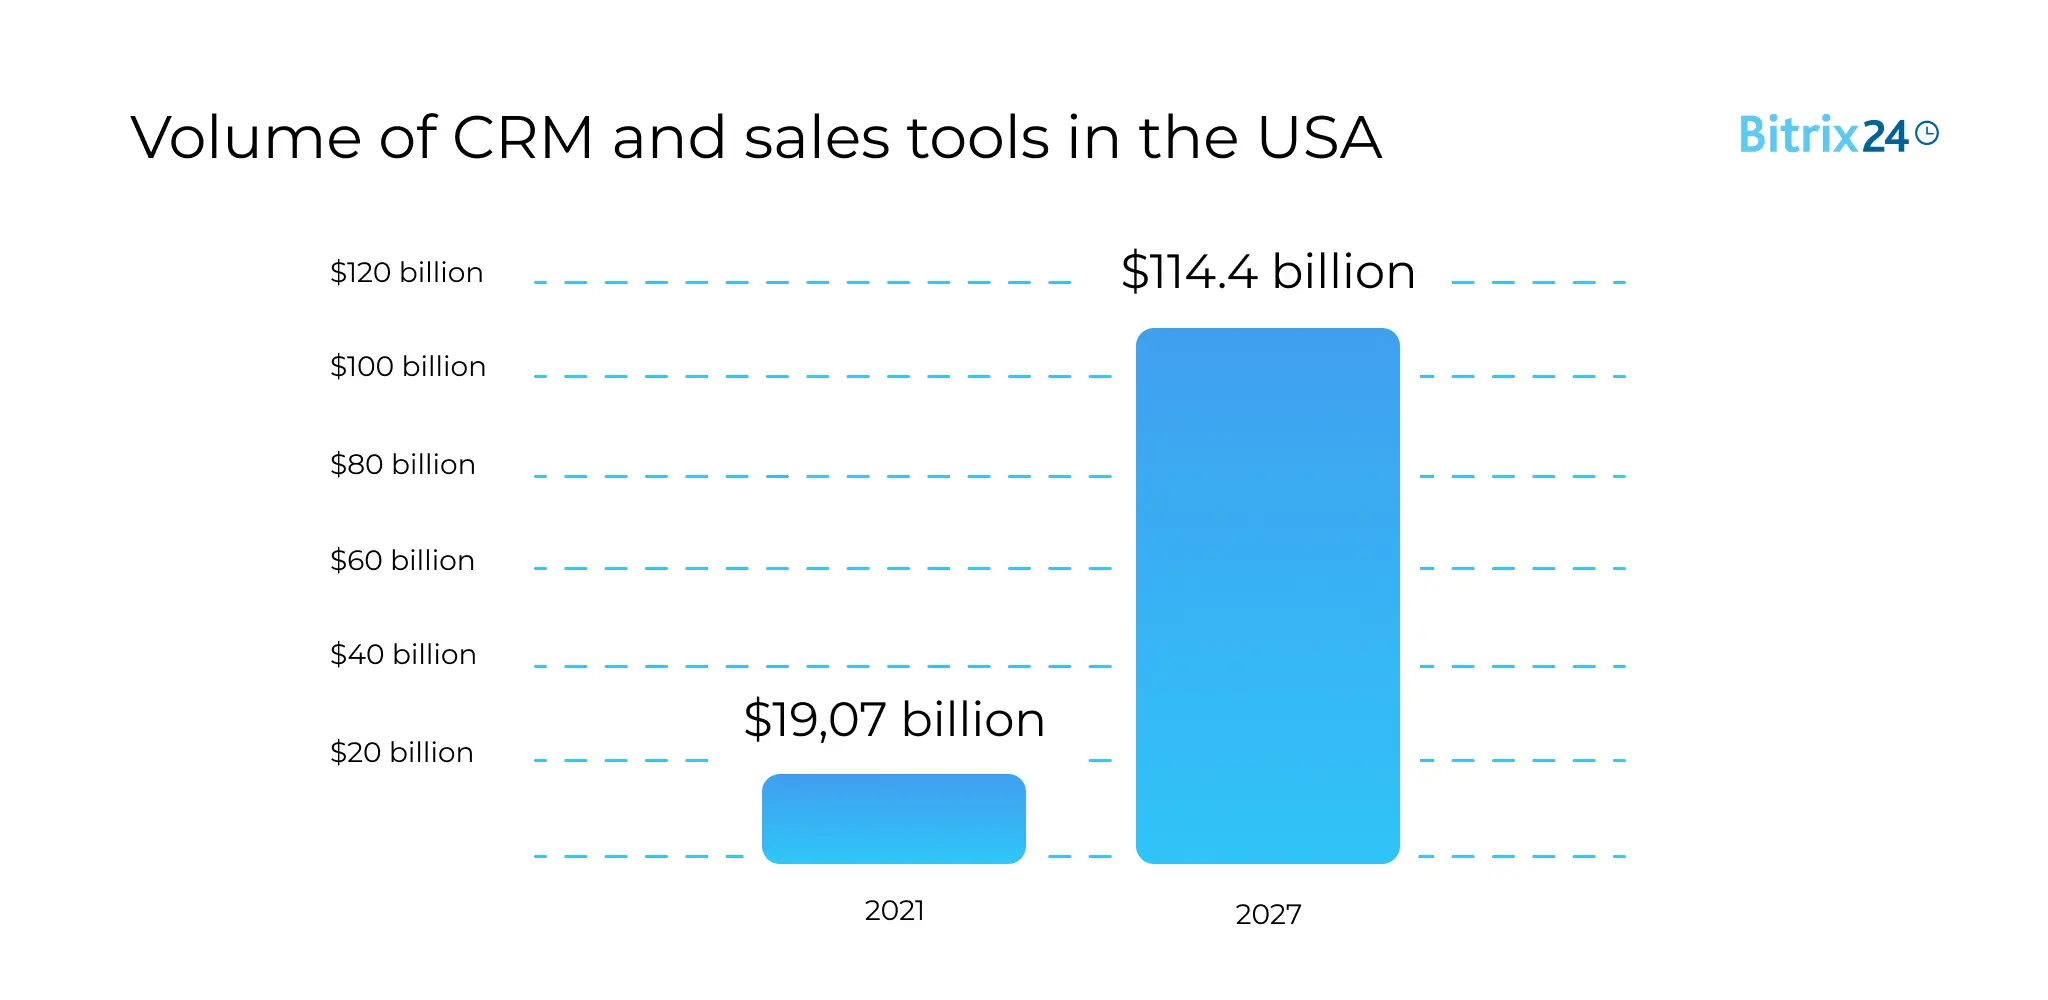 The Volume of CRM and Sales Tools in the USA